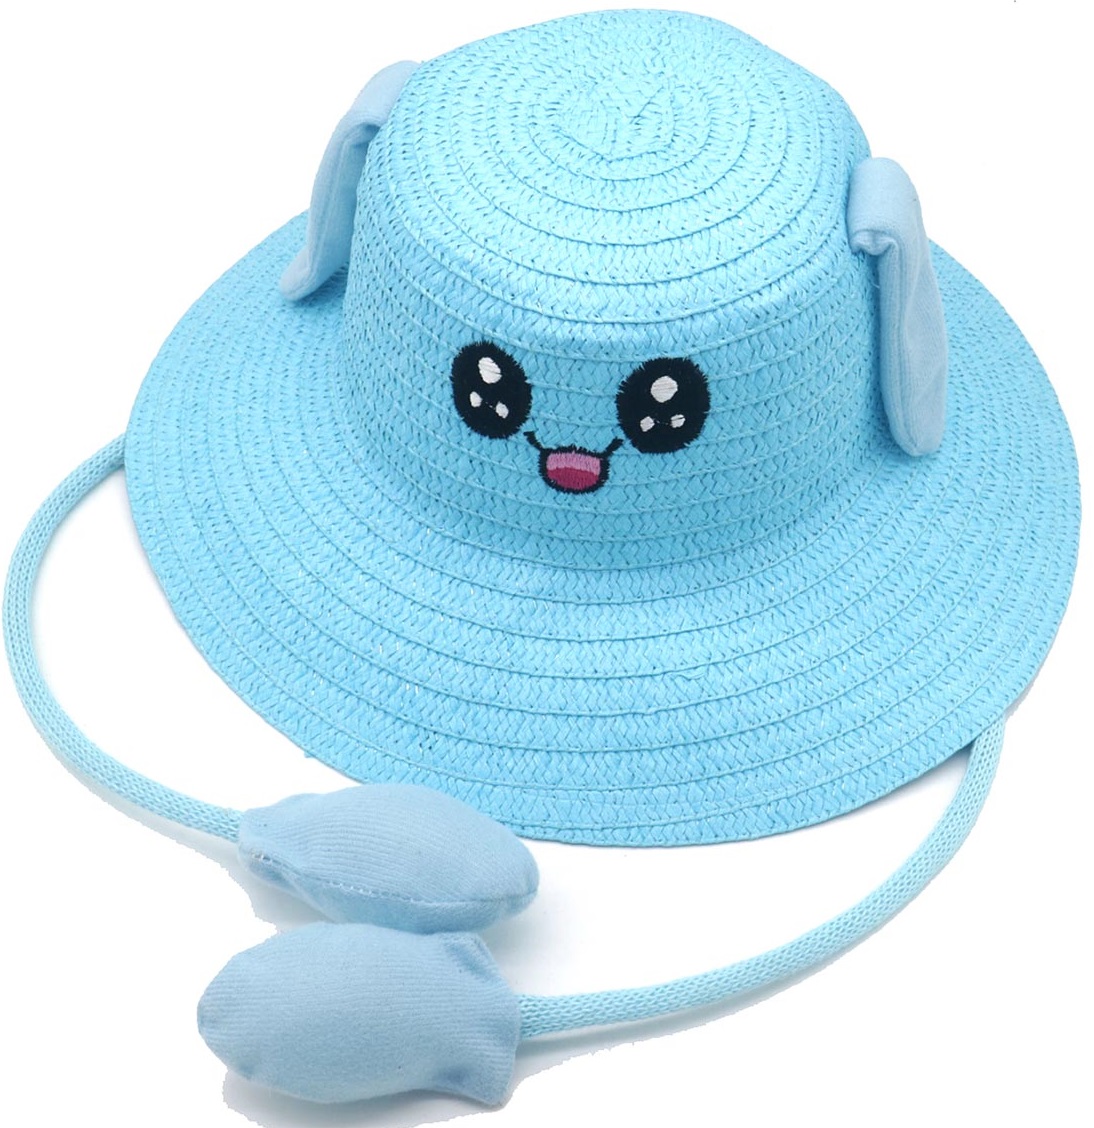 Y-C3.5 HAT802-010-2 Hat for Kids with Moving Ears Blue